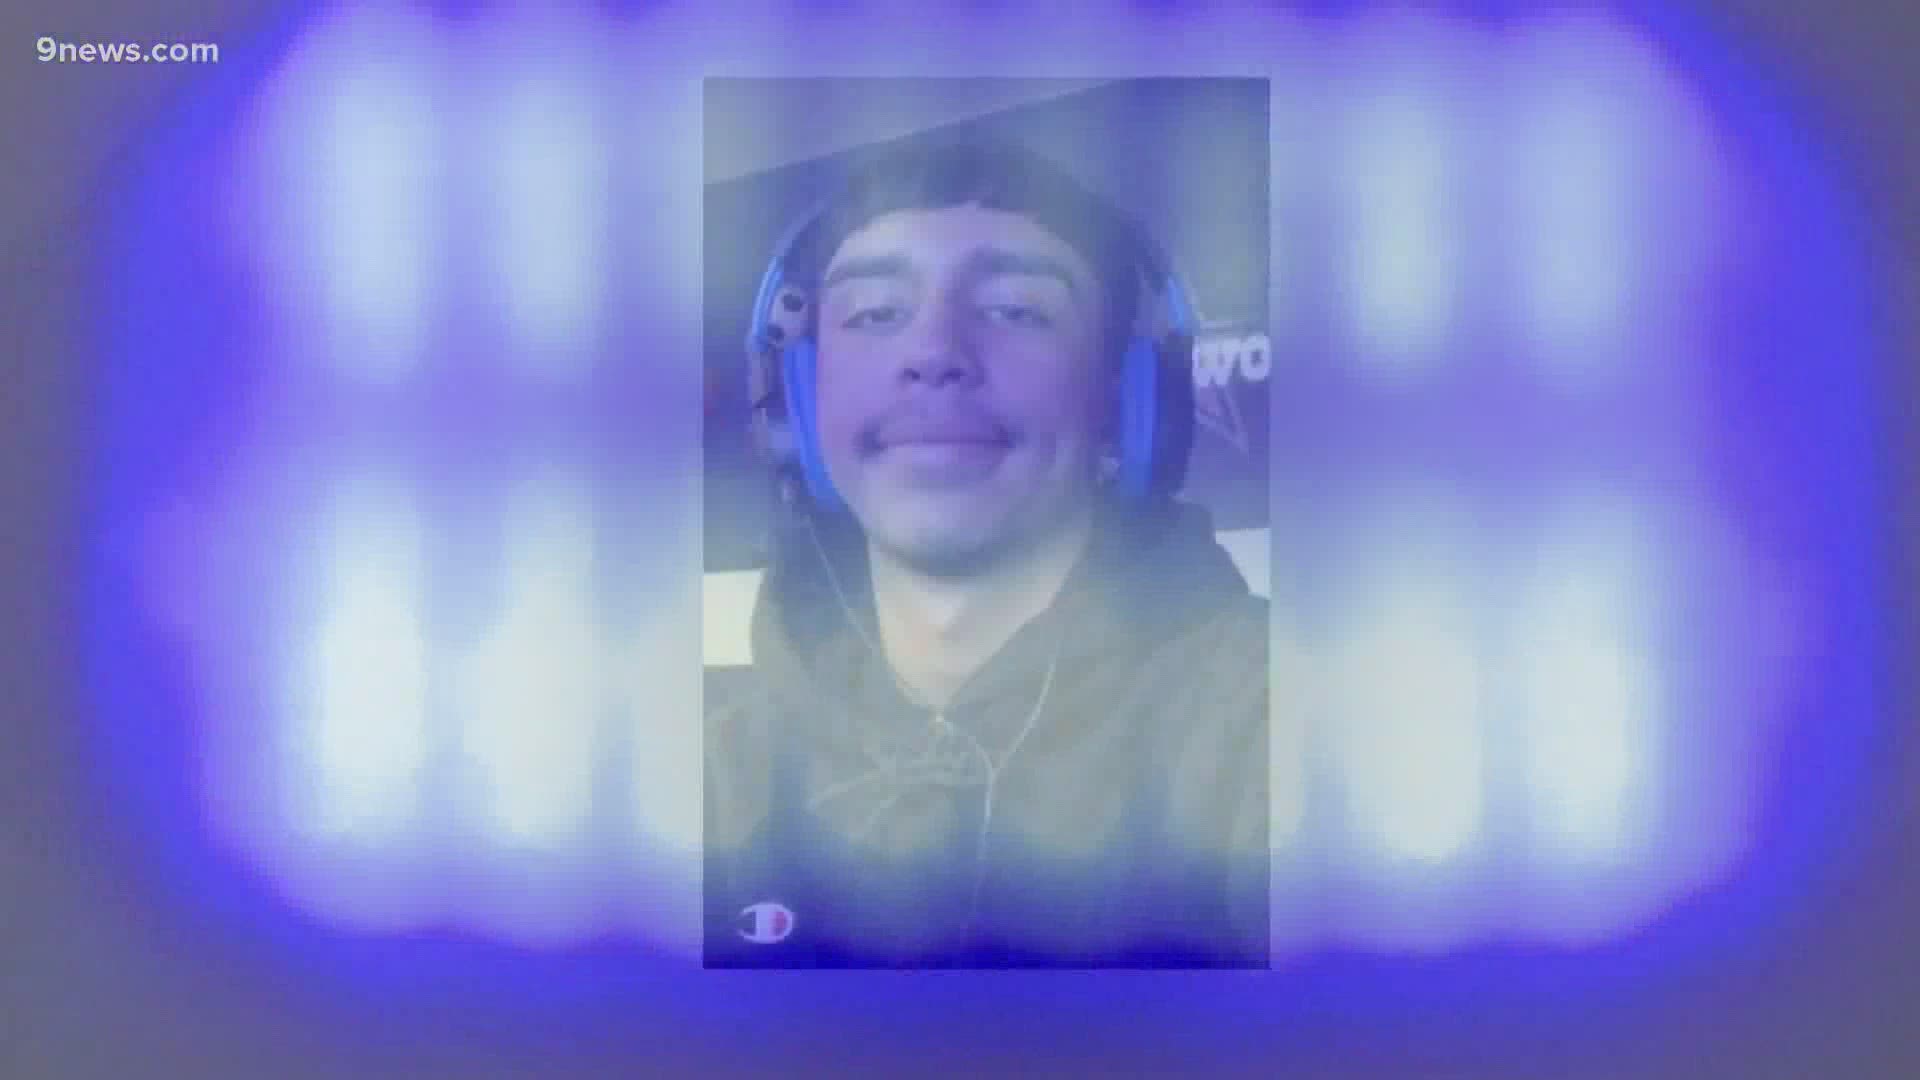 16-year-old Alexis Mendez-Perez was shot to death exactly one year ago today.